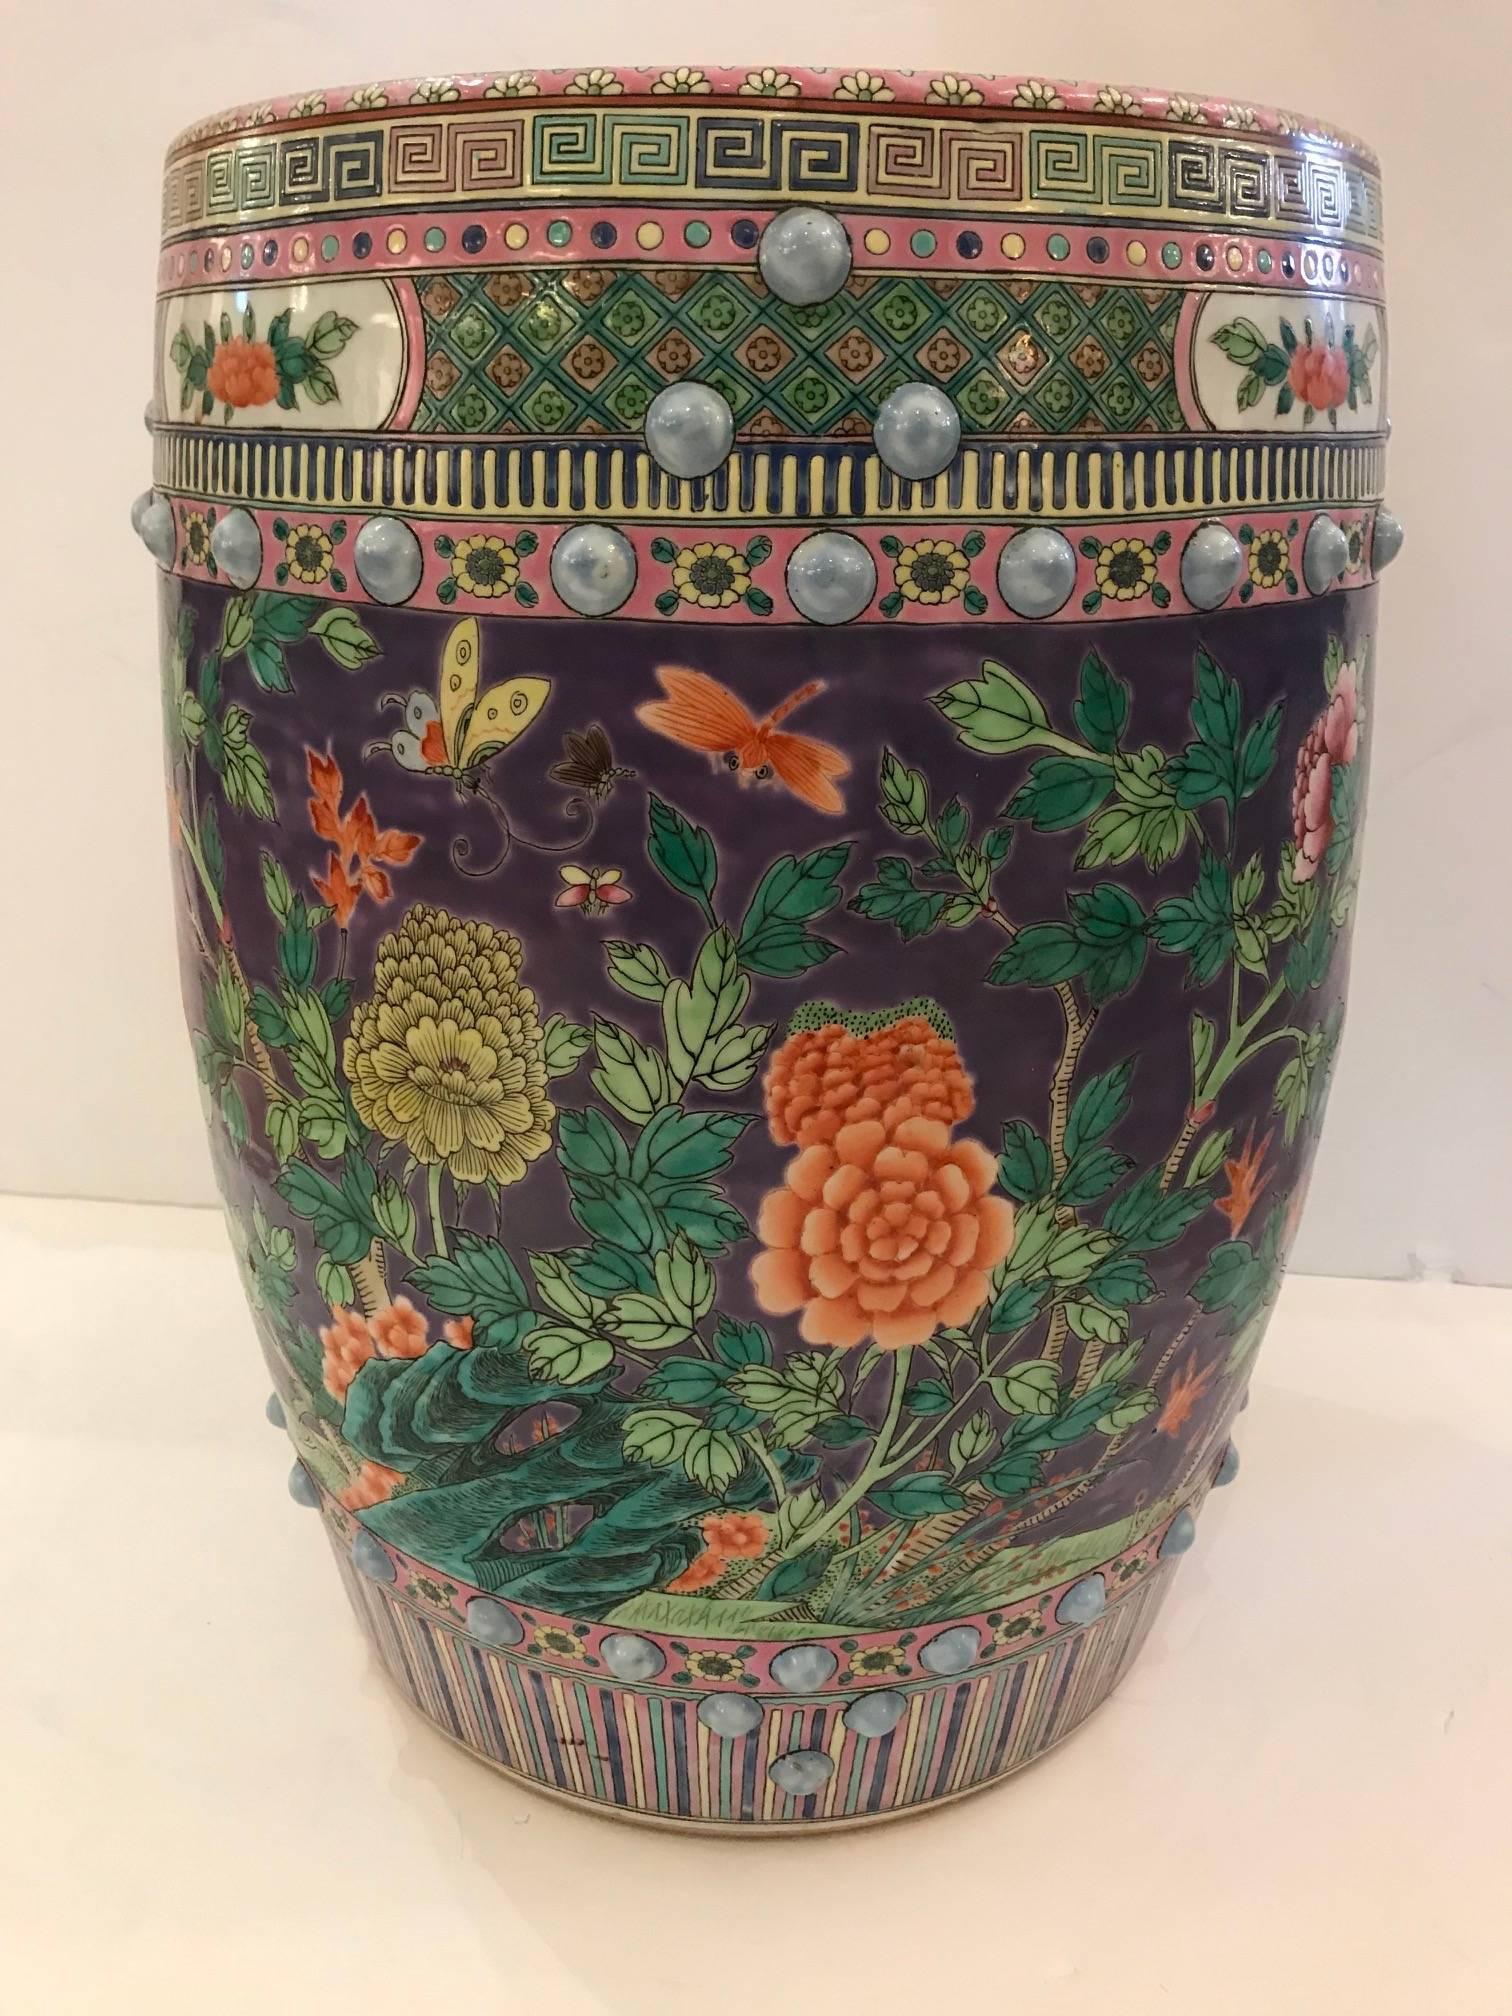 Absolutely gorgeous round Chinese garden seat with meticulous decoration having flowers, butterflies and such, in a dreamy color palette of lavender, greens, orange and pink. Makes a scrumptious occasional table.  
 